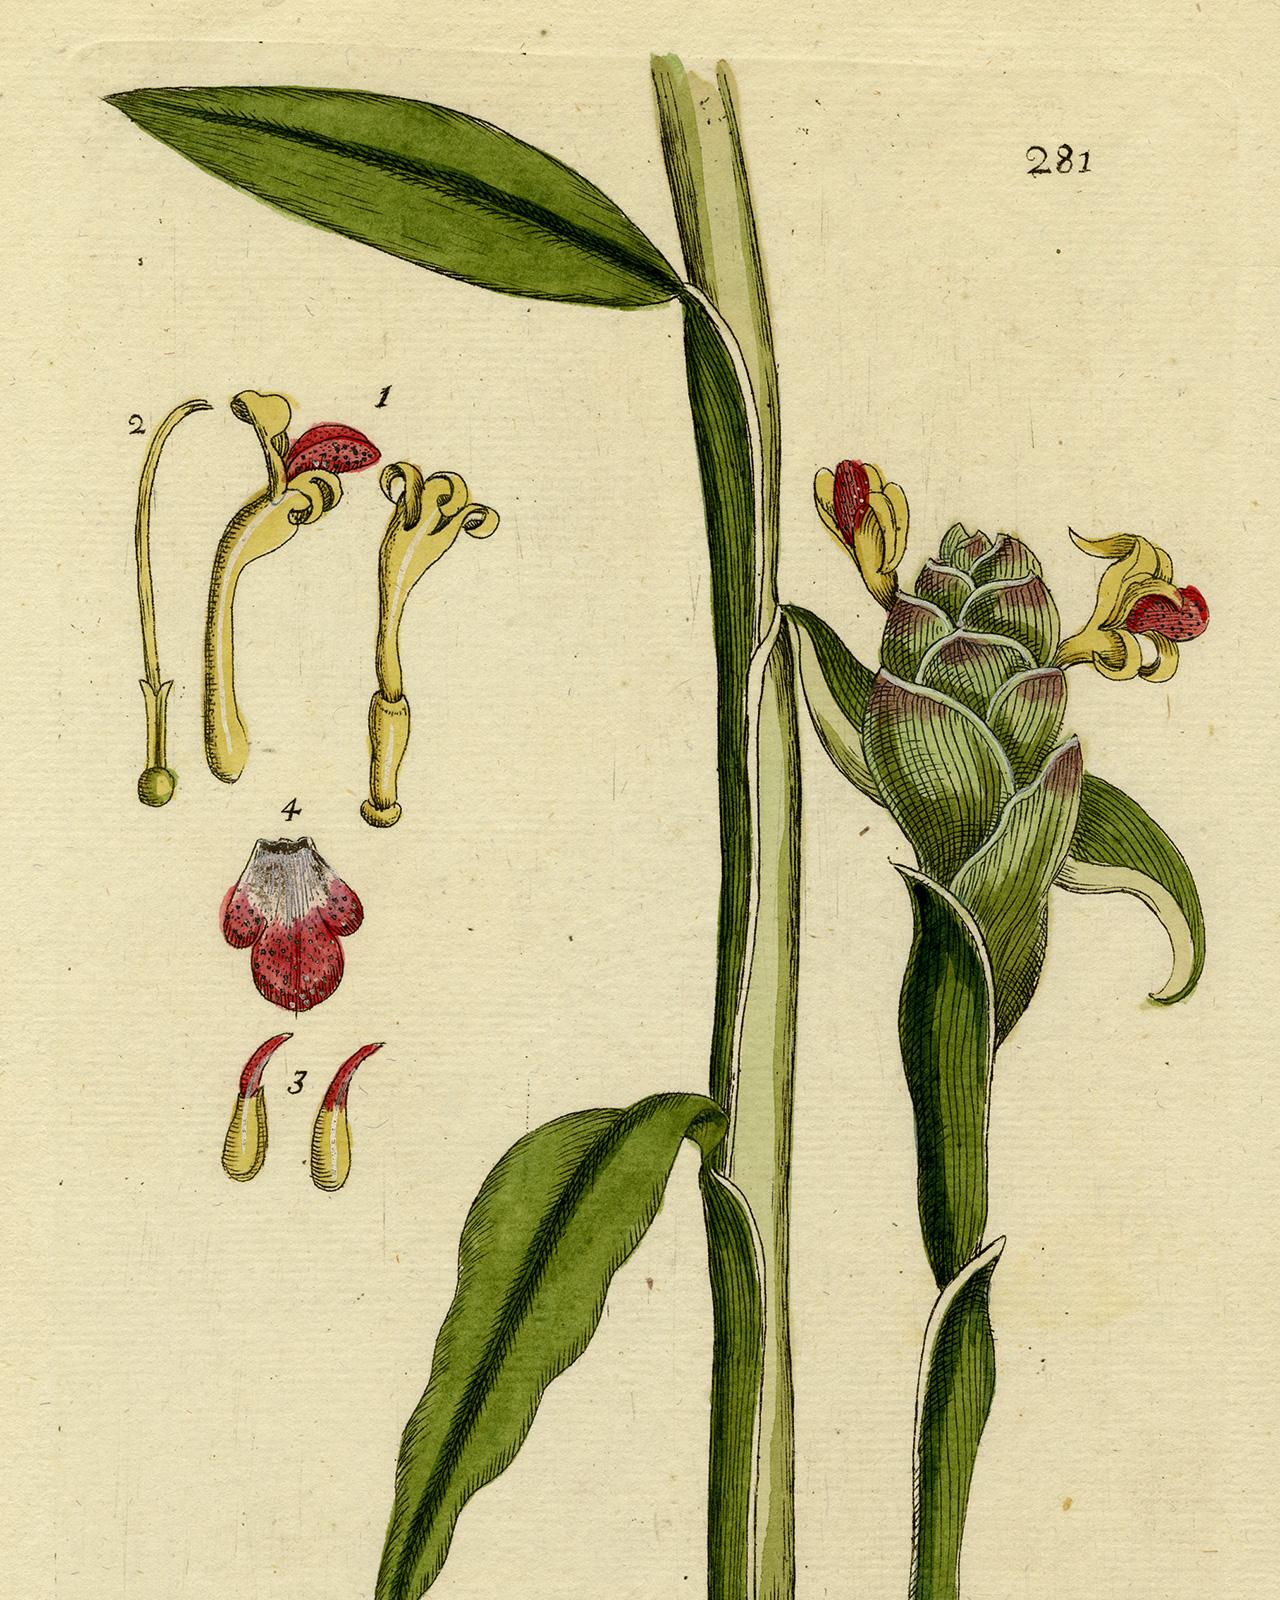 Amomum Ginger from Medicinal Plants by Happe - Handcoloured engraving - 18th c. - Old Masters Print by Andreas Friedrich Happe